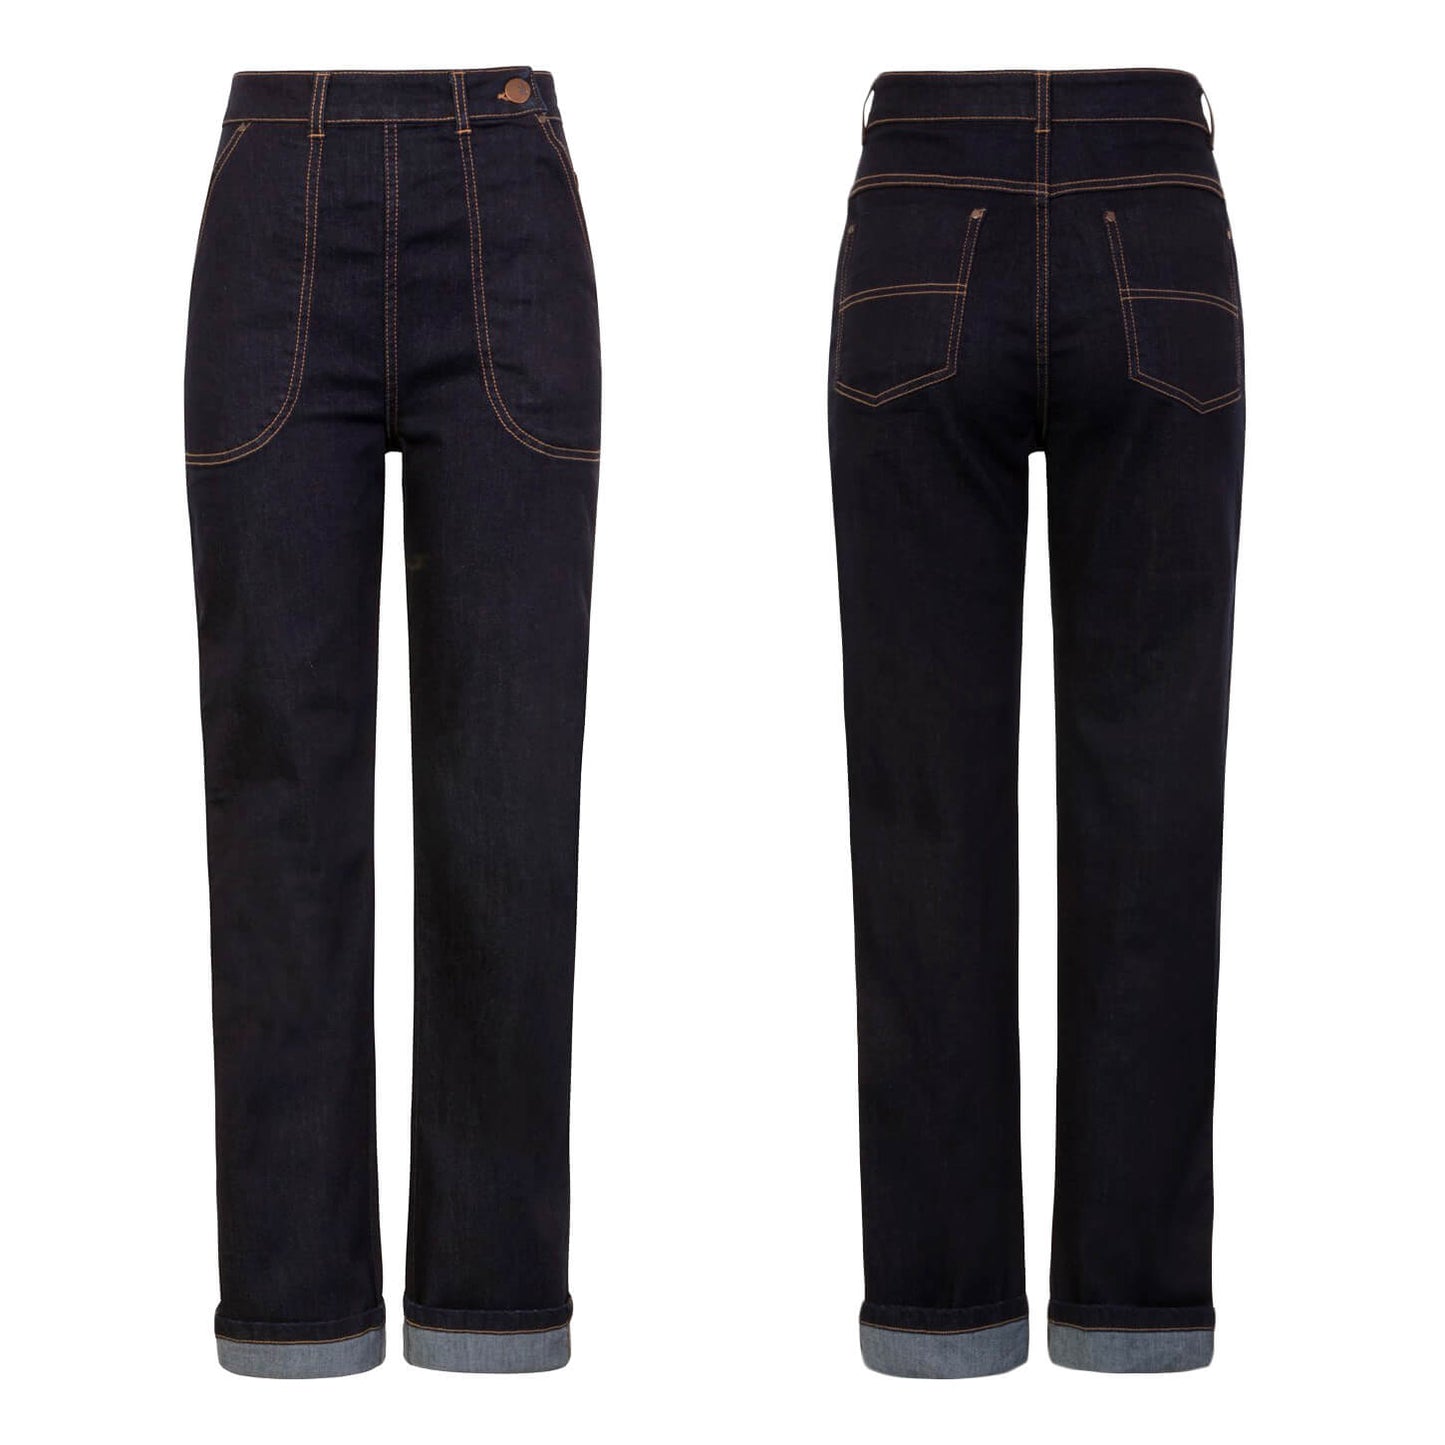 Hell Bunny Weston Denim Vintage-Style Jeans - Navy Blue on invisible mannequin